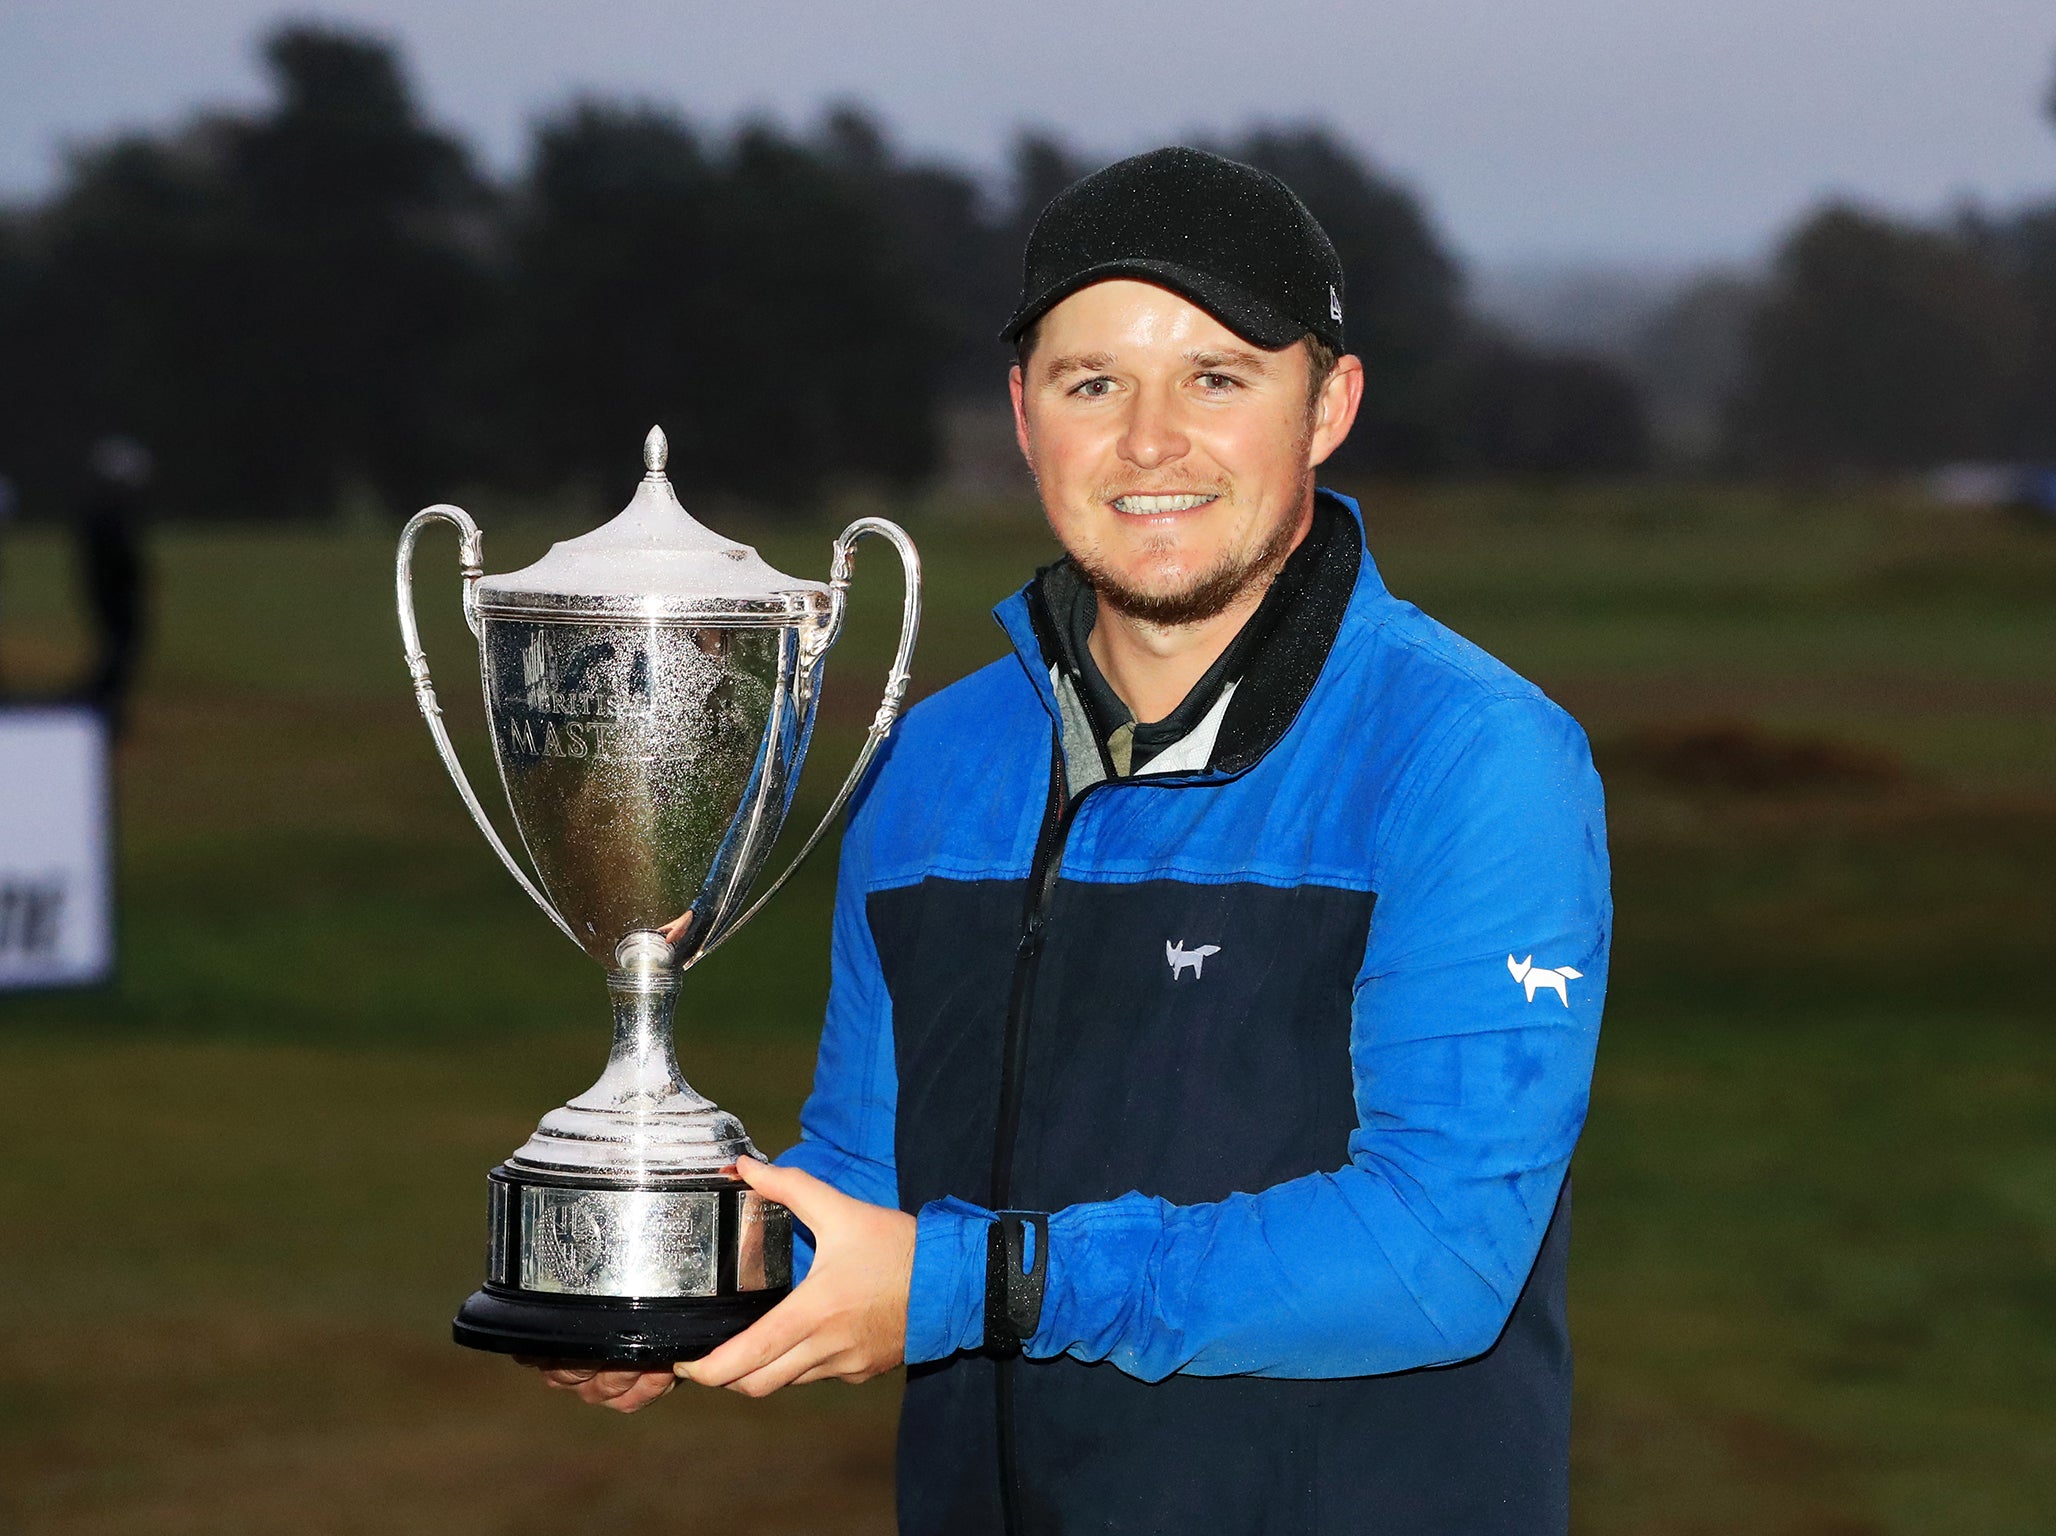 Eddie Pepperell poses with his trophy